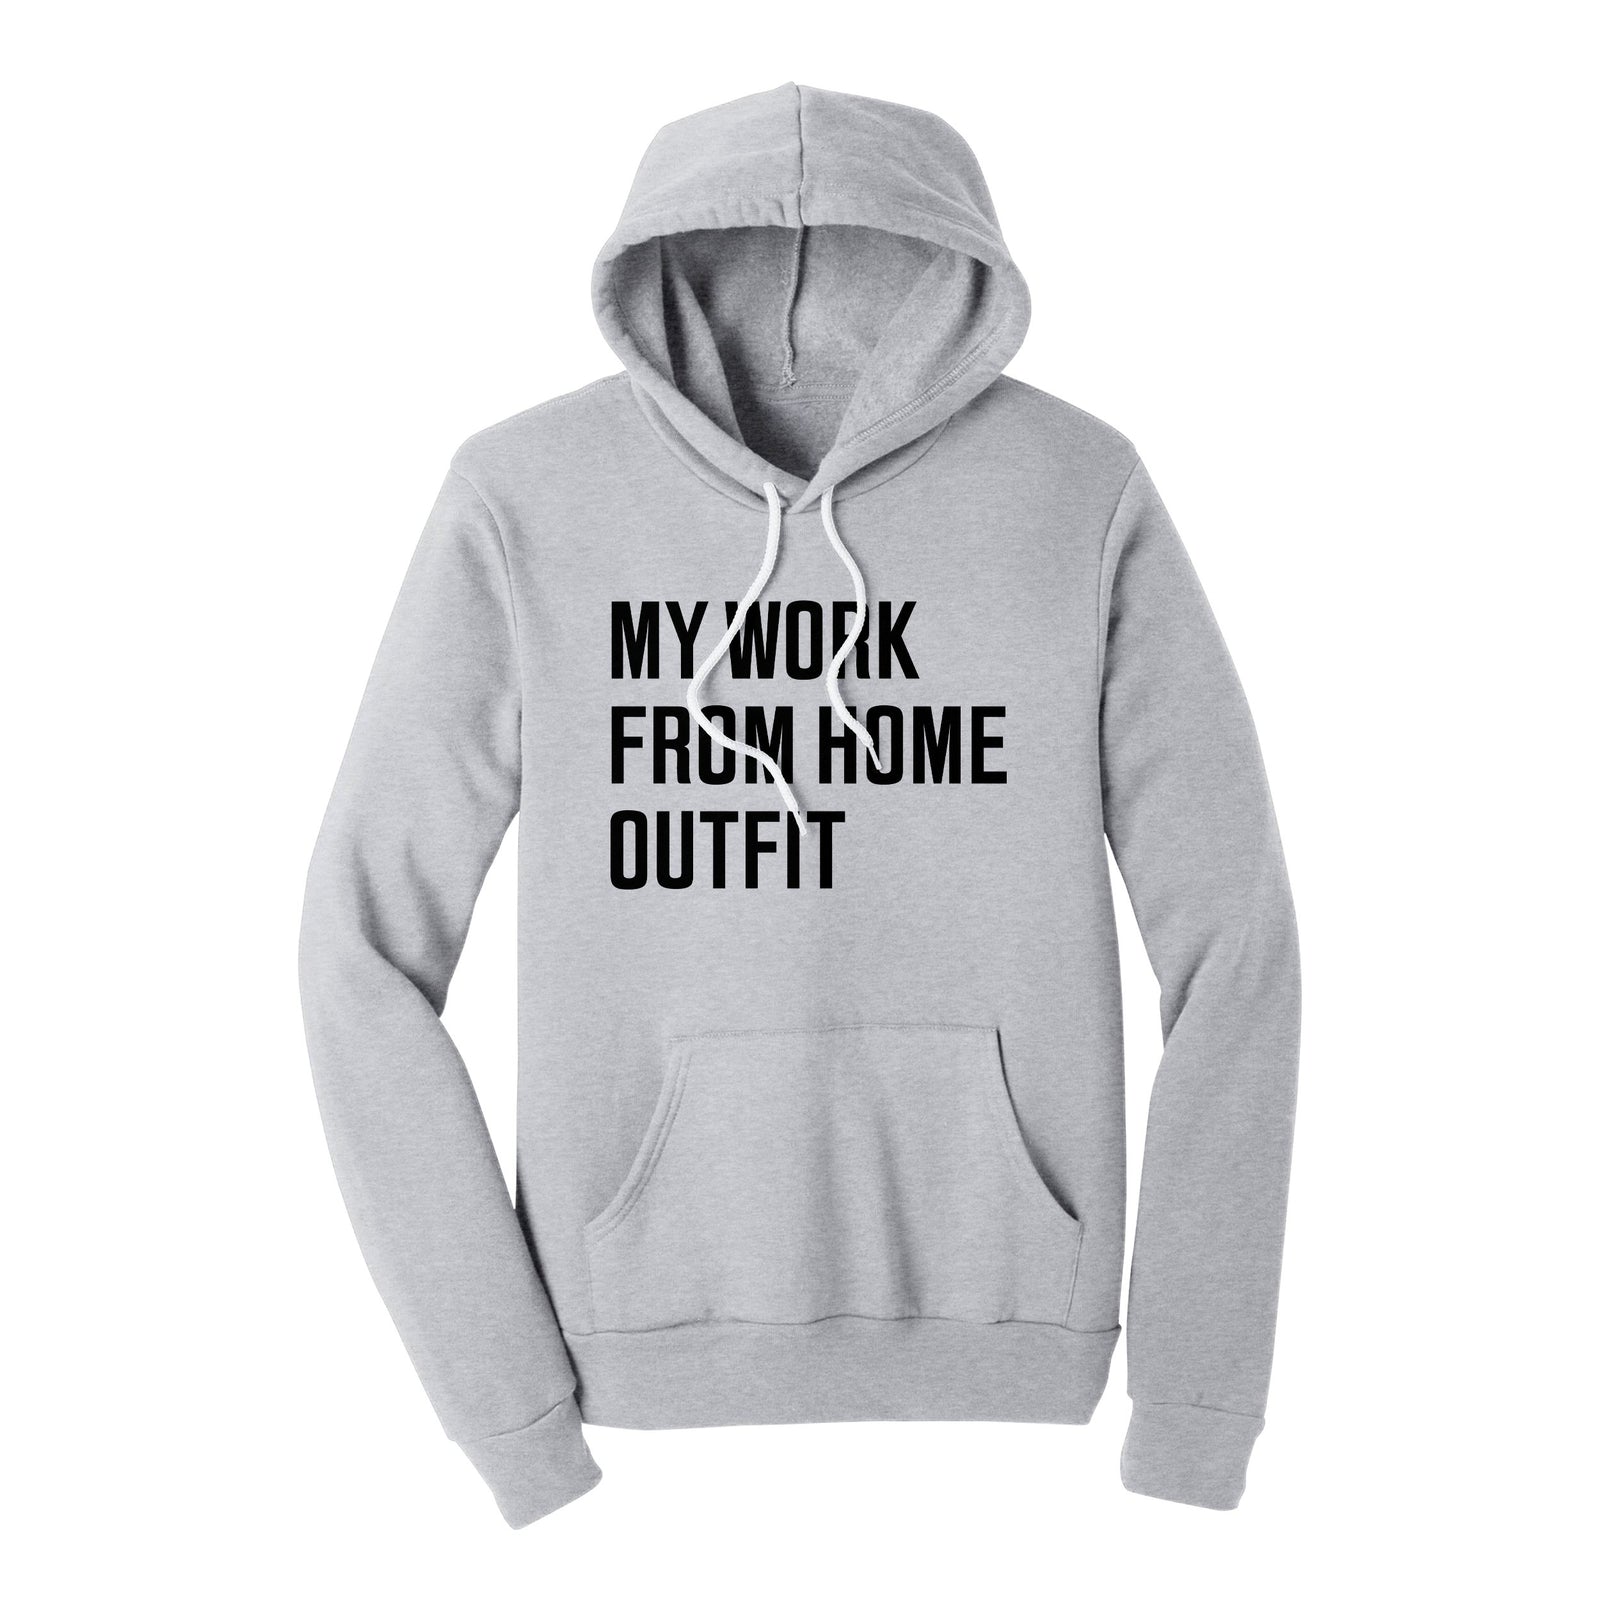 //cdn.shopify.com/s/files/1/0274/2488/2766/products/my-work-from-home-outfit-hoodie-694806_5000x.jpg?v=1675242835 5000w,
    //cdn.shopify.com/s/files/1/0274/2488/2766/products/my-work-from-home-outfit-hoodie-694806_4500x.jpg?v=1675242835 4500w,
    //cdn.shopify.com/s/files/1/0274/2488/2766/products/my-work-from-home-outfit-hoodie-694806_4000x.jpg?v=1675242835 4000w,
    //cdn.shopify.com/s/files/1/0274/2488/2766/products/my-work-from-home-outfit-hoodie-694806_3500x.jpg?v=1675242835 3500w,
    //cdn.shopify.com/s/files/1/0274/2488/2766/products/my-work-from-home-outfit-hoodie-694806_3000x.jpg?v=1675242835 3000w,
    //cdn.shopify.com/s/files/1/0274/2488/2766/products/my-work-from-home-outfit-hoodie-694806_2500x.jpg?v=1675242835 2500w,
    //cdn.shopify.com/s/files/1/0274/2488/2766/products/my-work-from-home-outfit-hoodie-694806_2000x.jpg?v=1675242835 2000w,
    //cdn.shopify.com/s/files/1/0274/2488/2766/products/my-work-from-home-outfit-hoodie-694806_1800x.jpg?v=1675242835 1800w,
    //cdn.shopify.com/s/files/1/0274/2488/2766/products/my-work-from-home-outfit-hoodie-694806_1600x.jpg?v=1675242835 1600w,
    //cdn.shopify.com/s/files/1/0274/2488/2766/products/my-work-from-home-outfit-hoodie-694806_1400x.jpg?v=1675242835 1400w,
    //cdn.shopify.com/s/files/1/0274/2488/2766/products/my-work-from-home-outfit-hoodie-694806_1200x.jpg?v=1675242835 1200w,
    //cdn.shopify.com/s/files/1/0274/2488/2766/products/my-work-from-home-outfit-hoodie-694806_1000x.jpg?v=1675242835 1000w,
    //cdn.shopify.com/s/files/1/0274/2488/2766/products/my-work-from-home-outfit-hoodie-694806_800x.jpg?v=1675242835 800w,
    //cdn.shopify.com/s/files/1/0274/2488/2766/products/my-work-from-home-outfit-hoodie-694806_600x.jpg?v=1675242835 600w,
    //cdn.shopify.com/s/files/1/0274/2488/2766/products/my-work-from-home-outfit-hoodie-694806_400x.jpg?v=1675242835 400w,
    //cdn.shopify.com/s/files/1/0274/2488/2766/products/my-work-from-home-outfit-hoodie-694806_200x.jpg?v=1675242835 200w